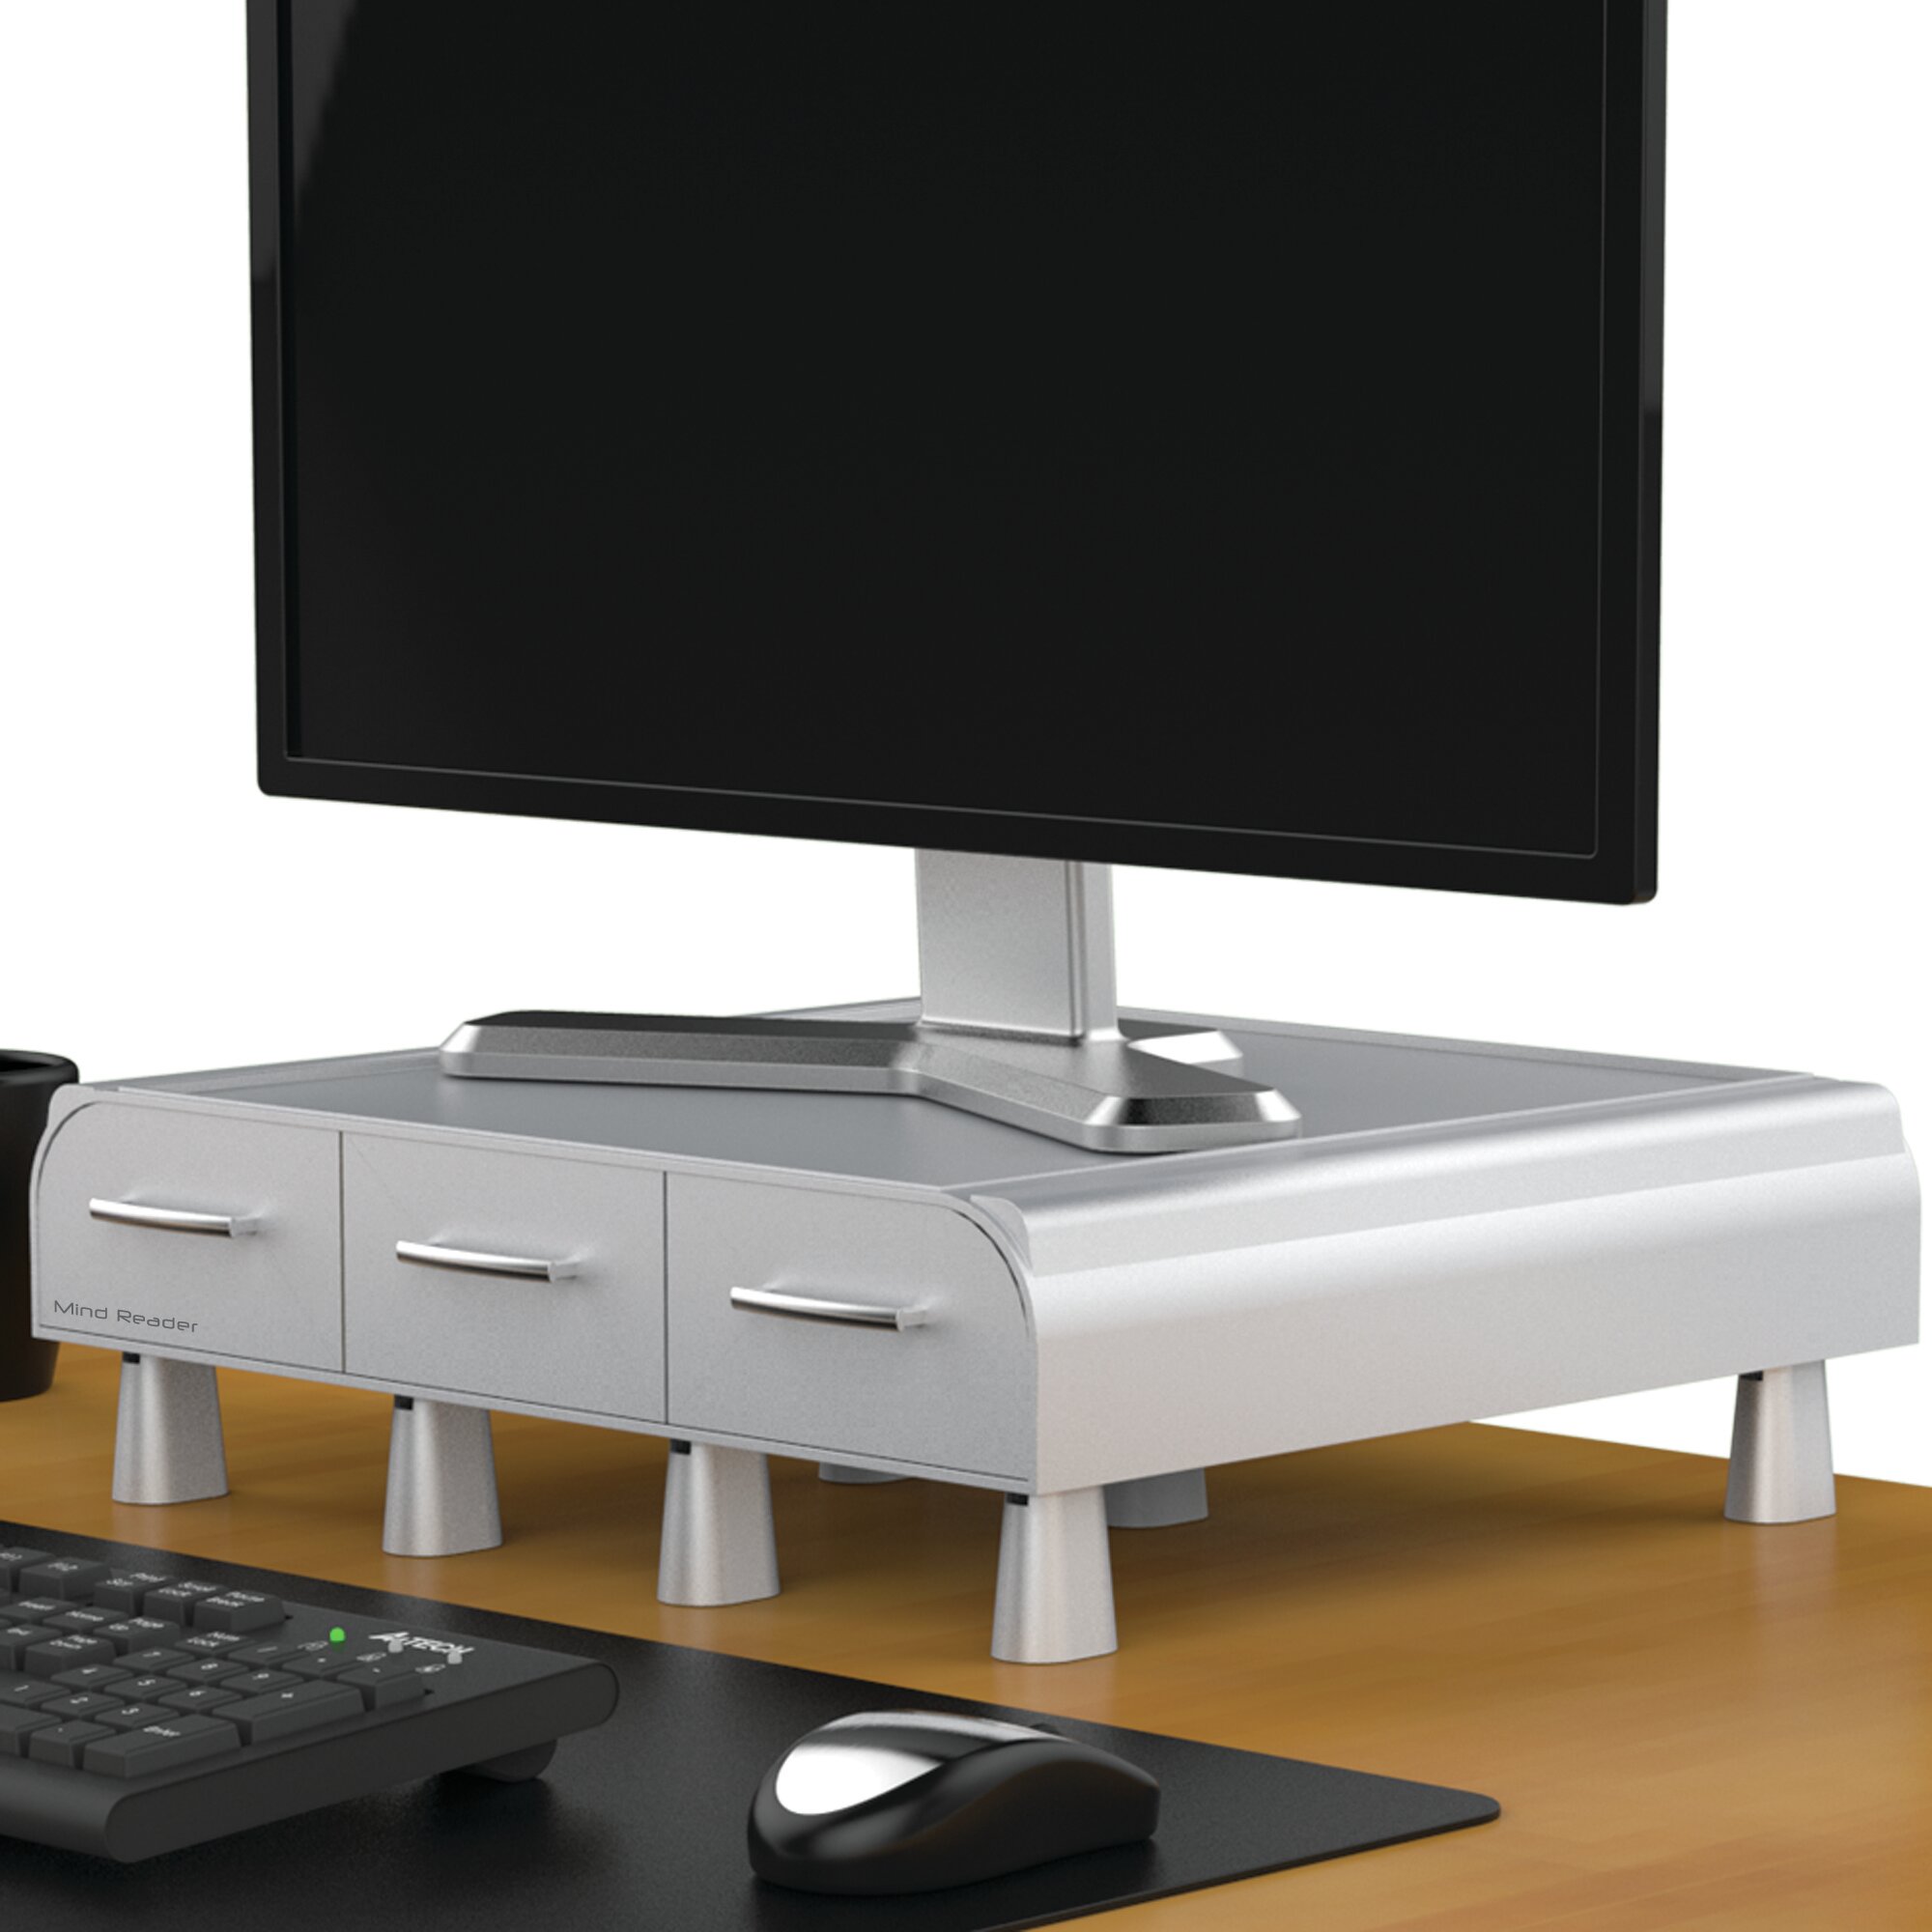 Mind Reader Perch Pc Laptop Imac Monitor Stand And Desk